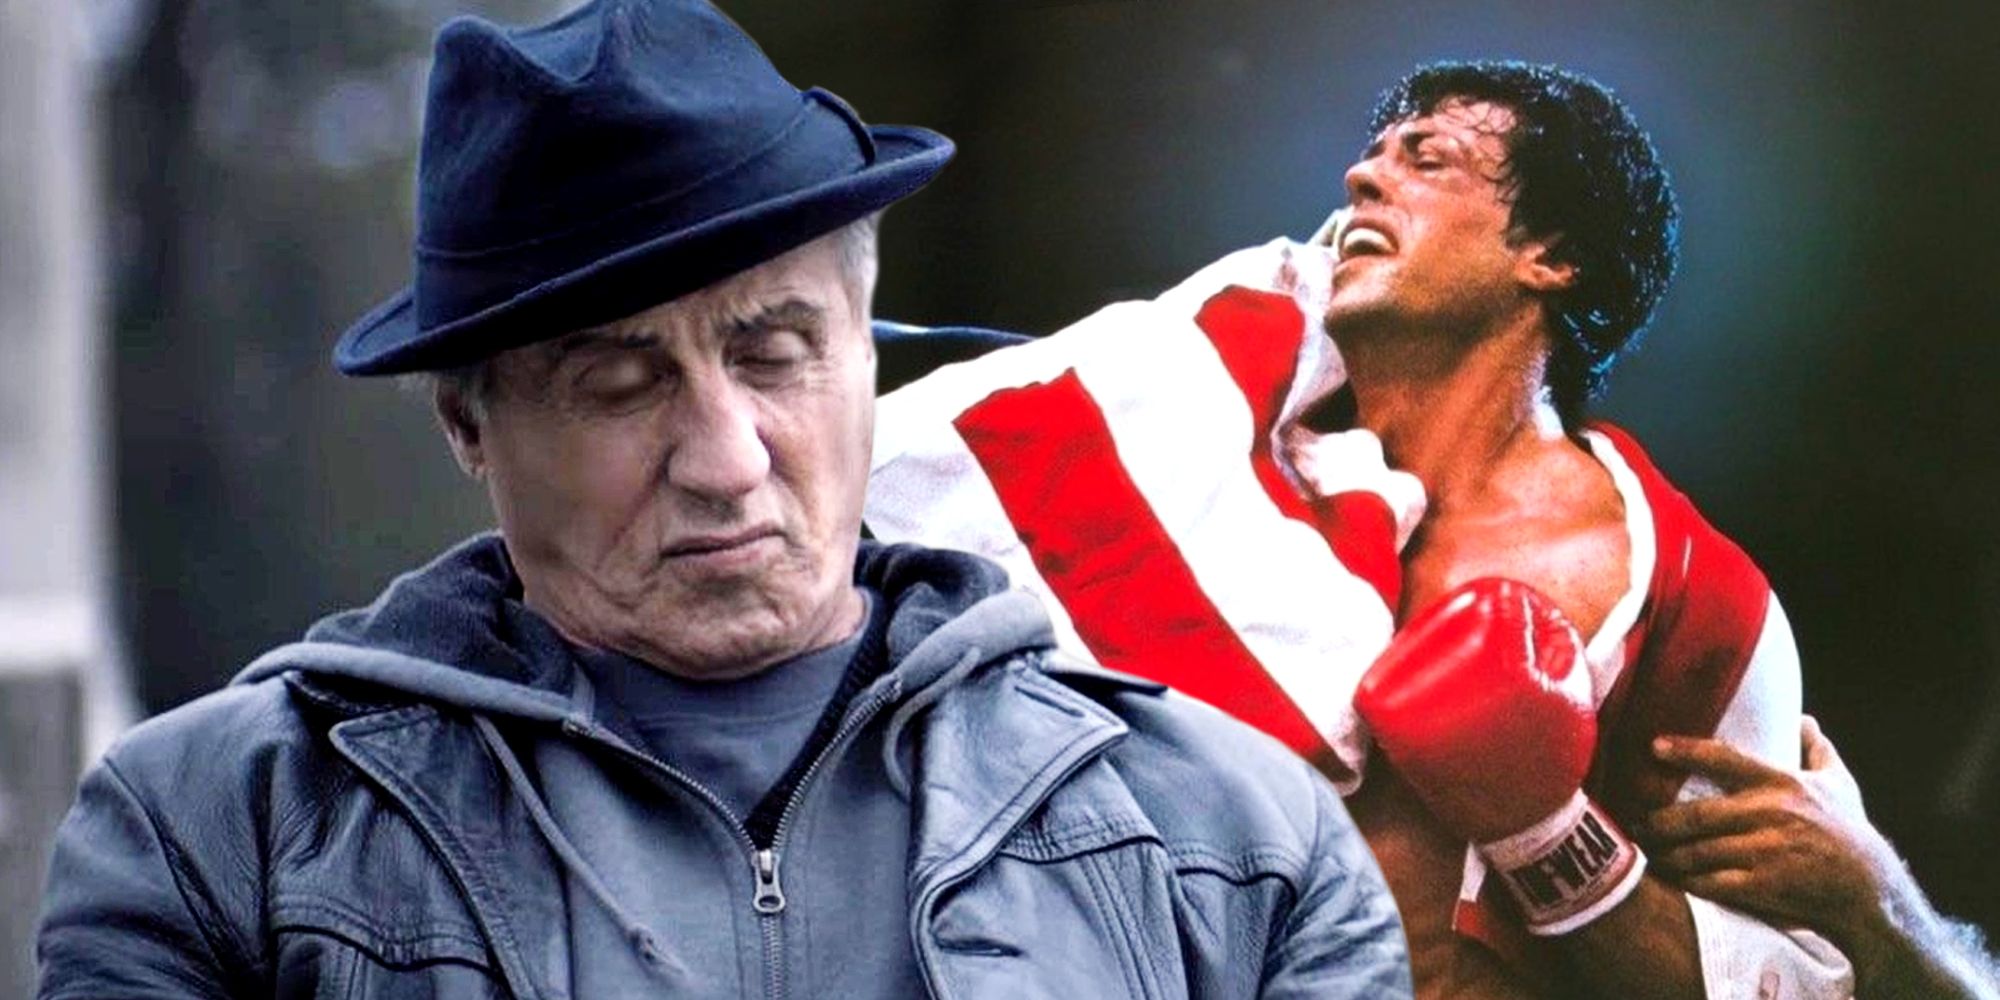 Sylvester Stallone in Rocky IV and Creed II